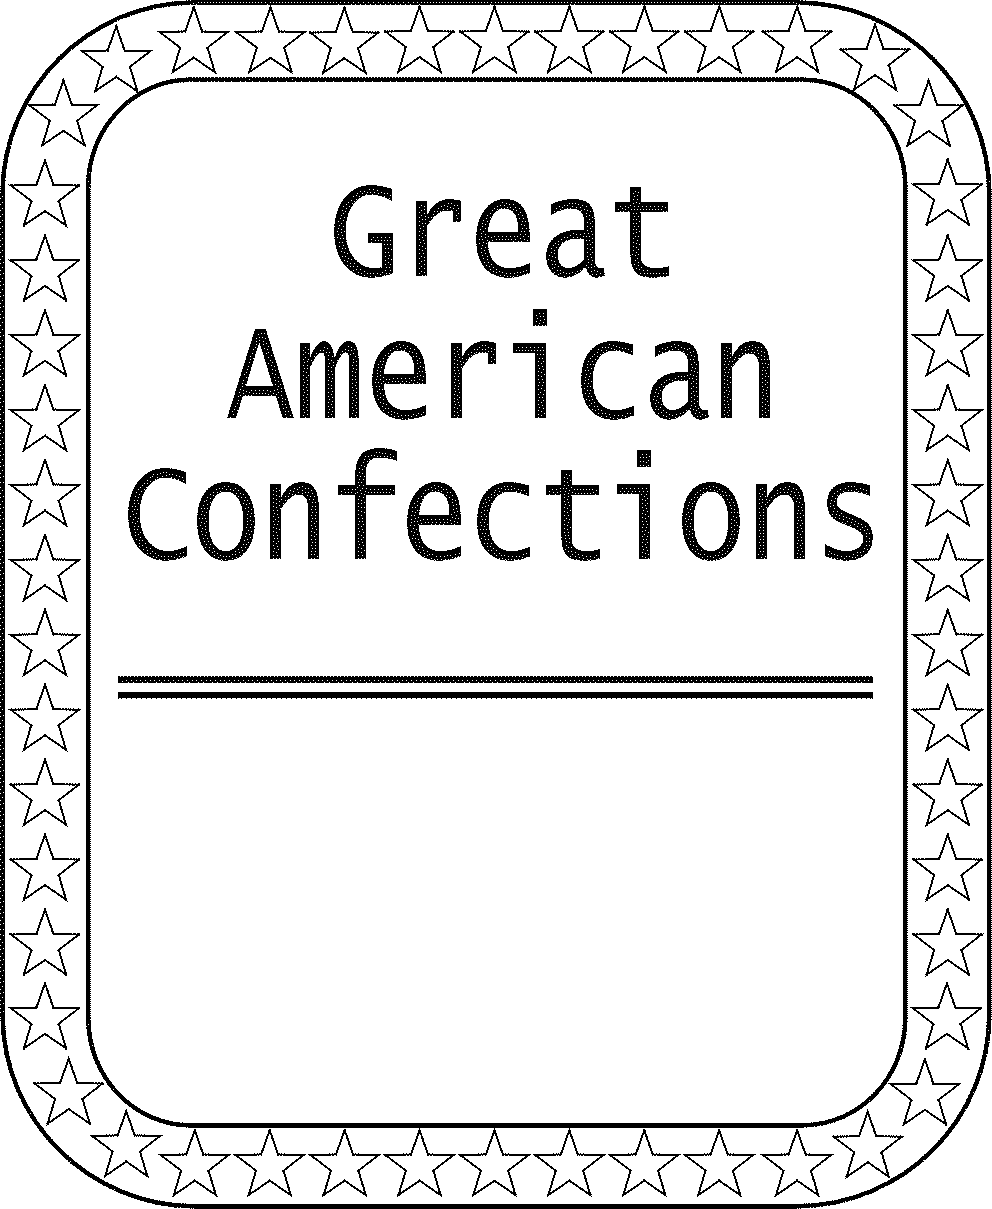  GREAT AMERICAN CONFECTIONS